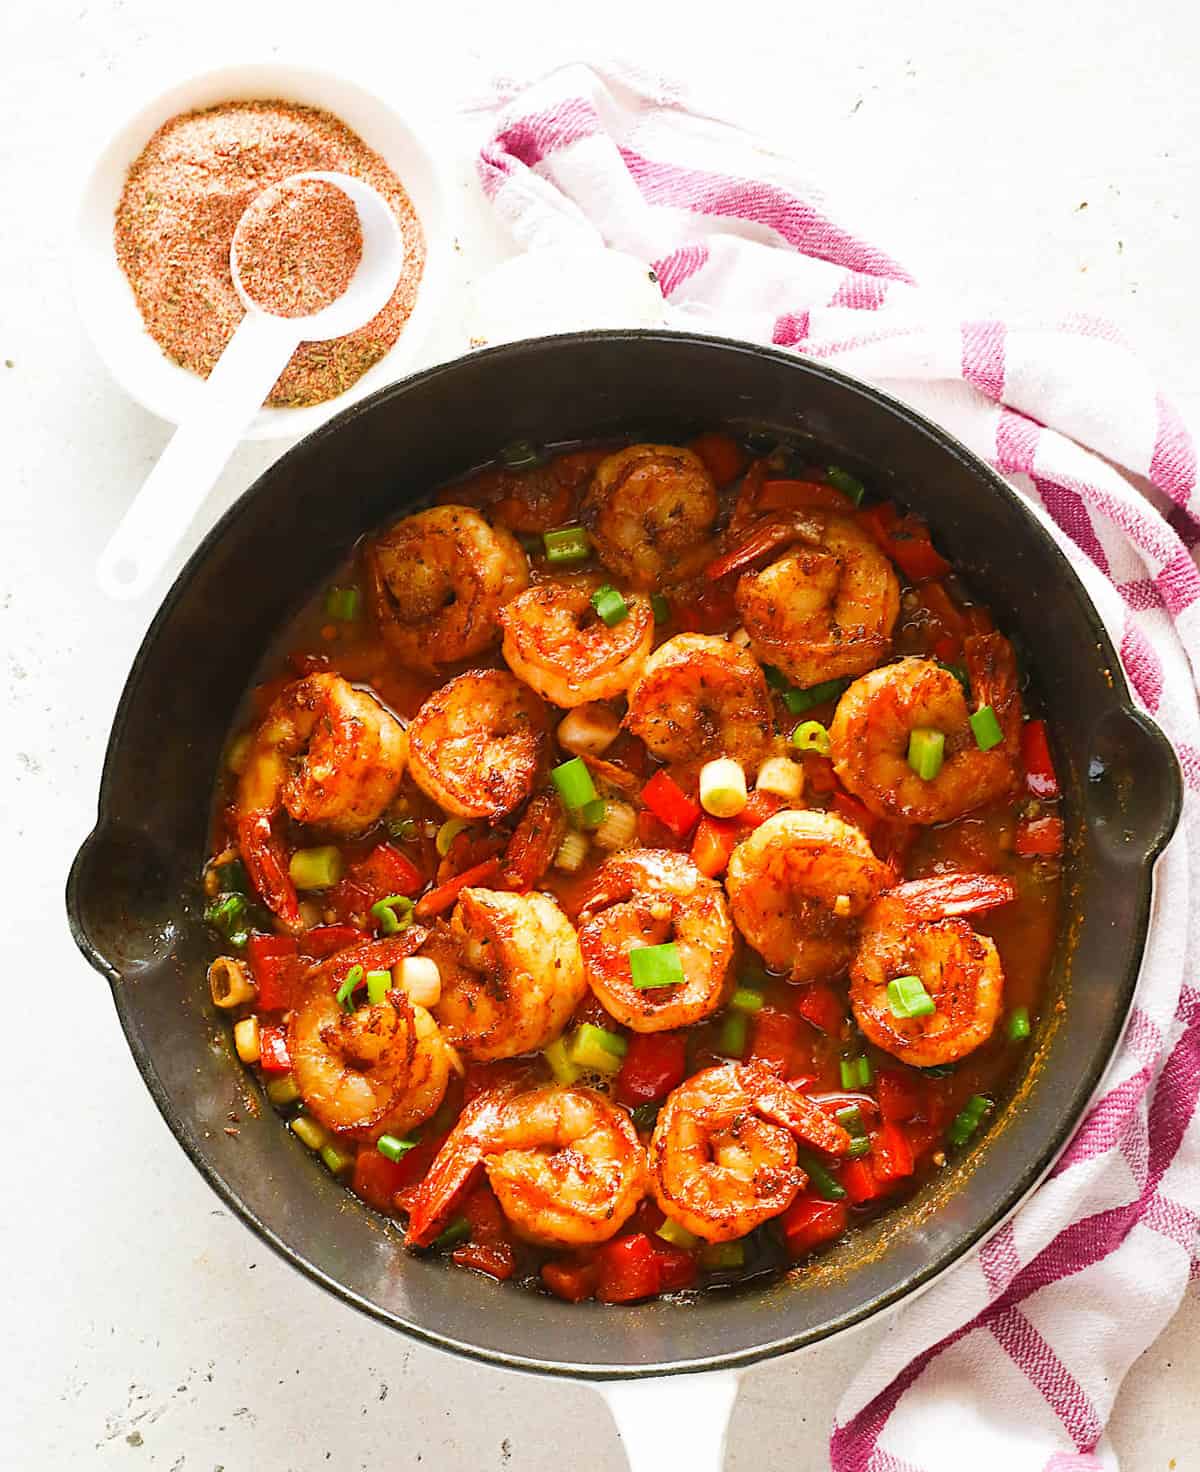 Cajun shrimp hot off the stove and smothered in a ridiculously delicious sauce